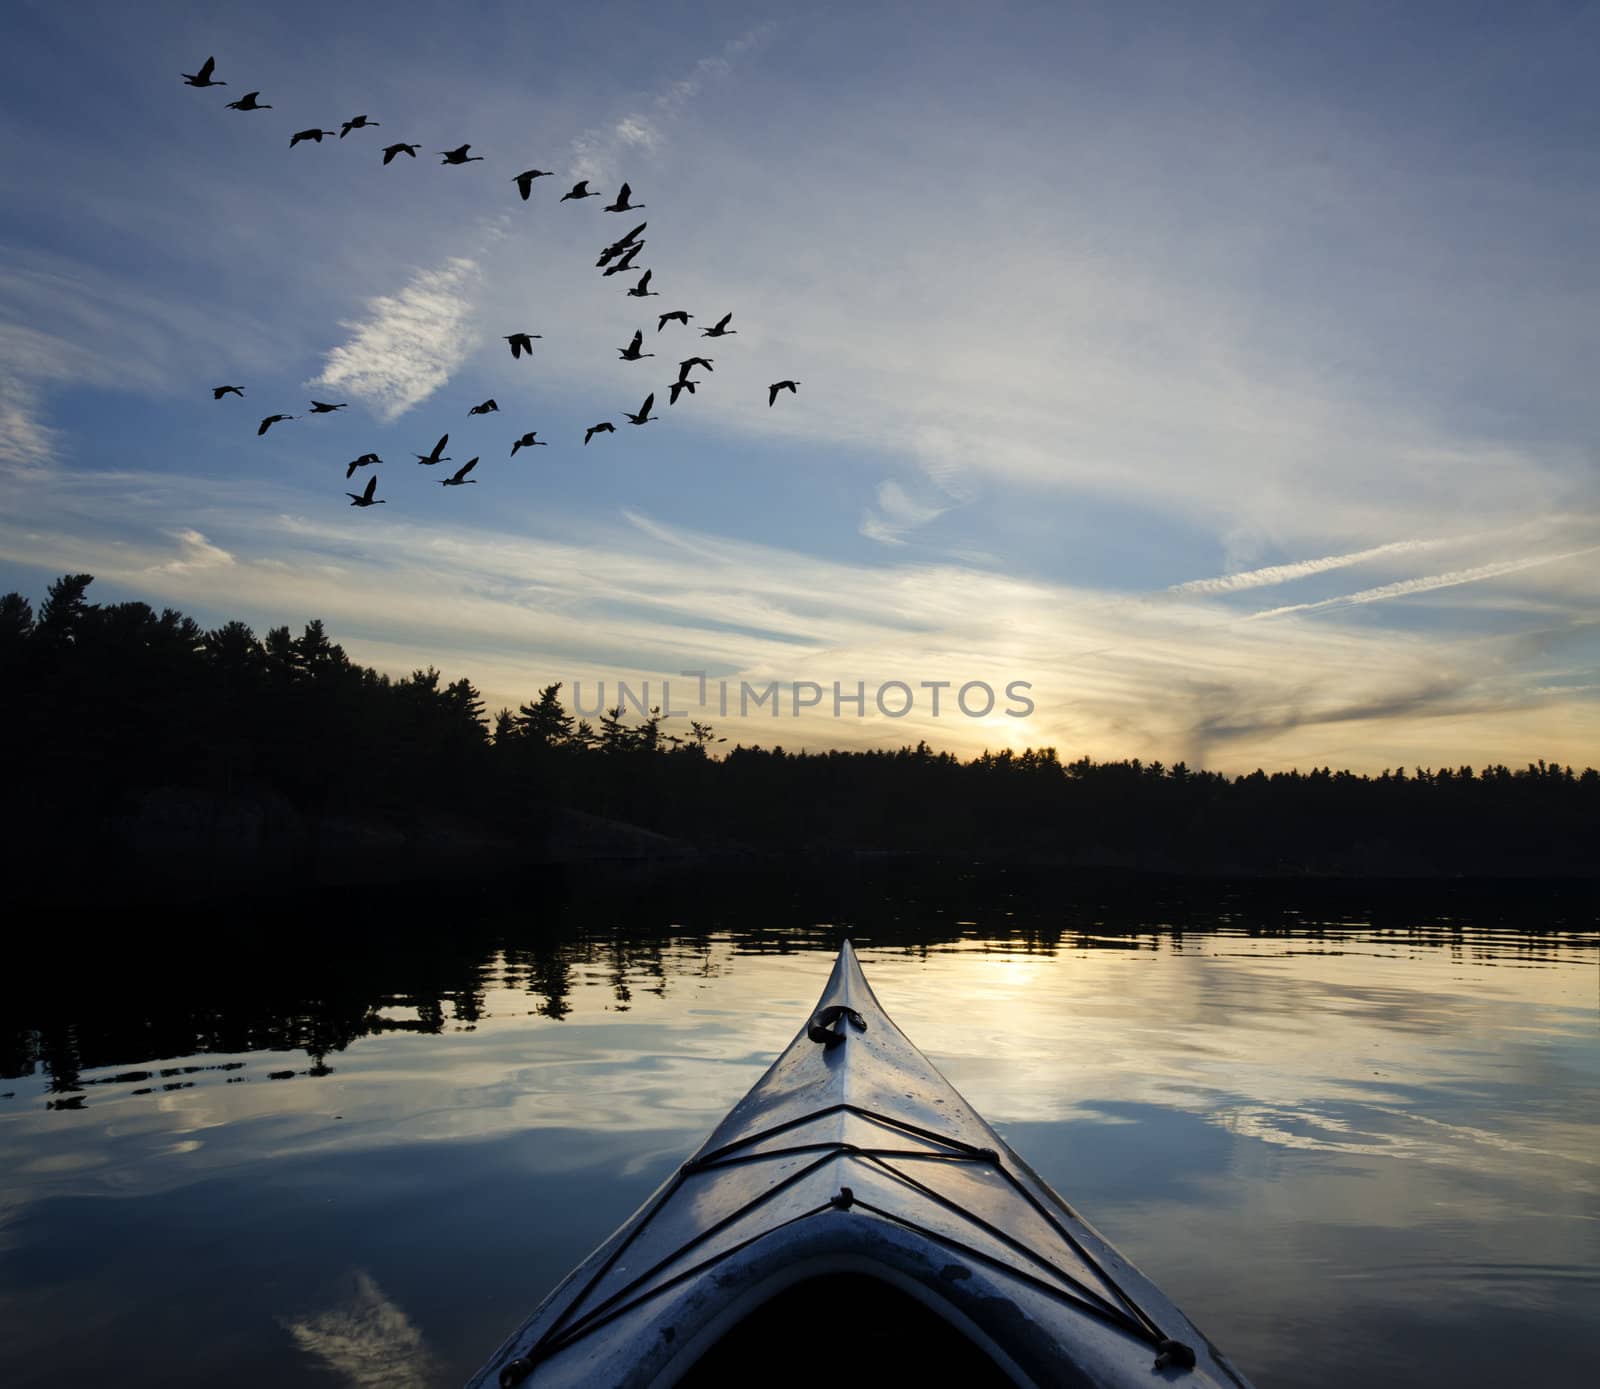 Kayak on the lake at sunset with geese looking to land